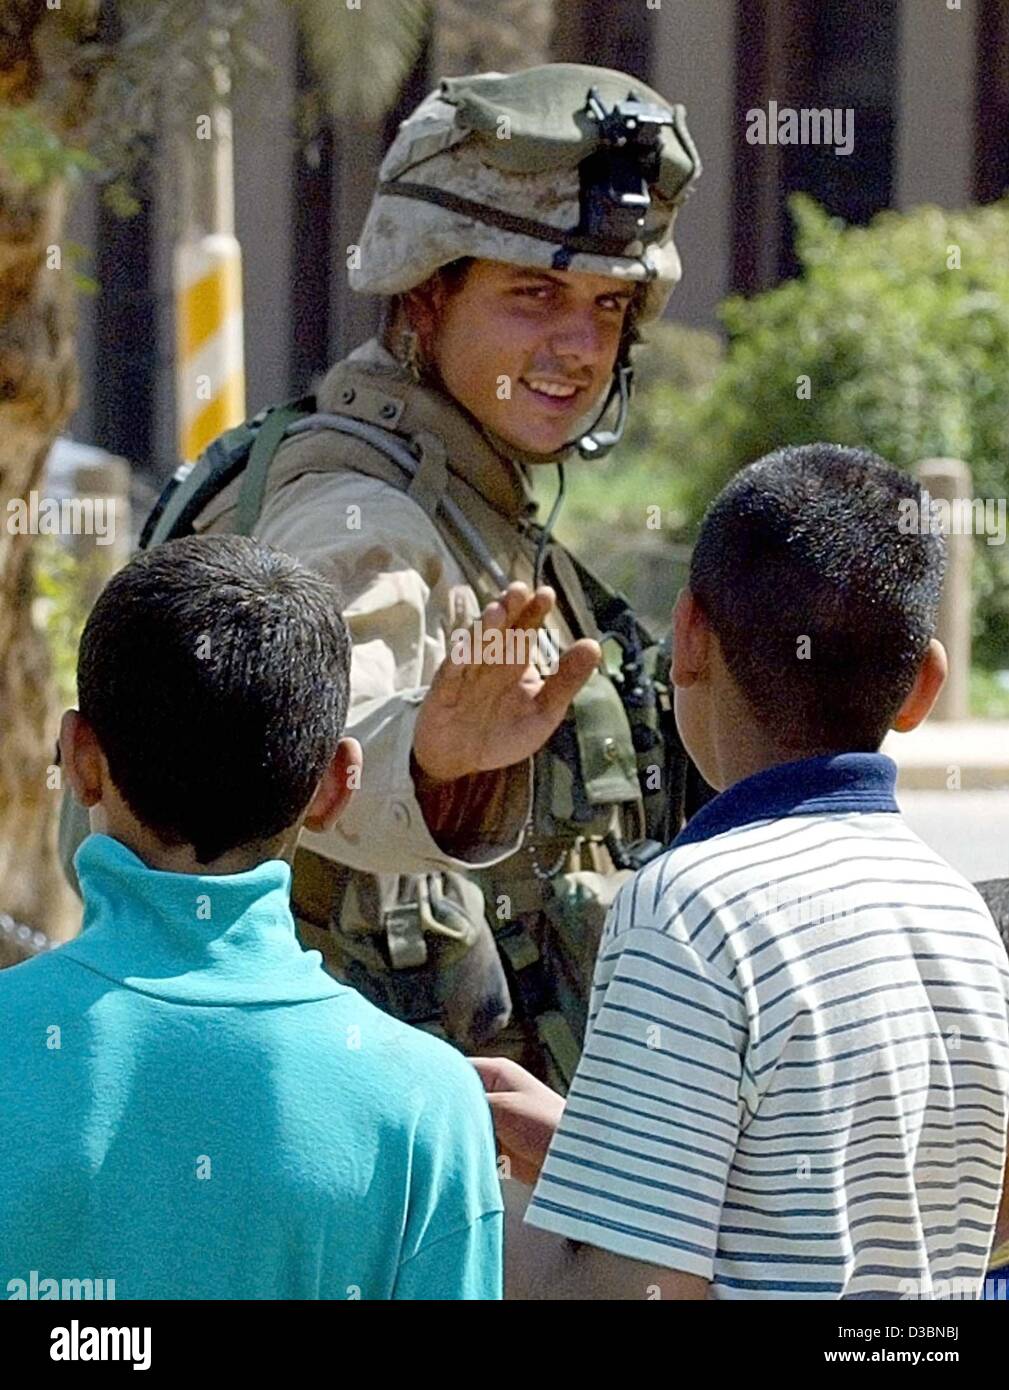 (dpa) - A US soldier greets two Iraqi boys in Baghdad, 11 April 2003. The entire medical care in Baghdad has broken down, Red Cross officials said. Hospitals and clinics in the Iraqi capital are closed, the patients have either fled or are left on their own. The rising temperature increases the risk Stock Photo